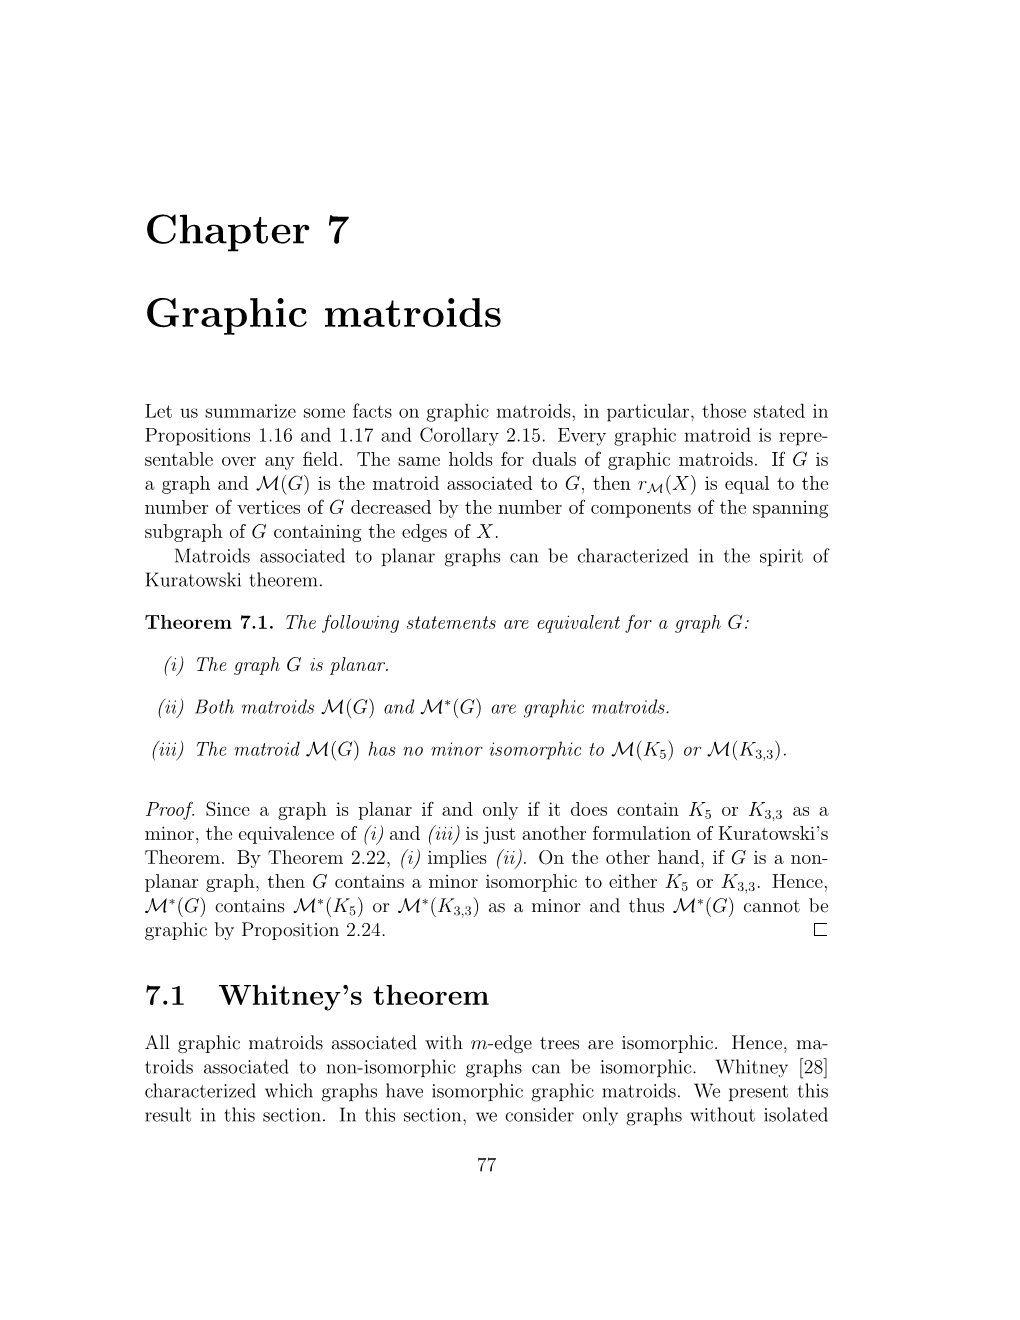 Chapter 7 Graphic Matroids